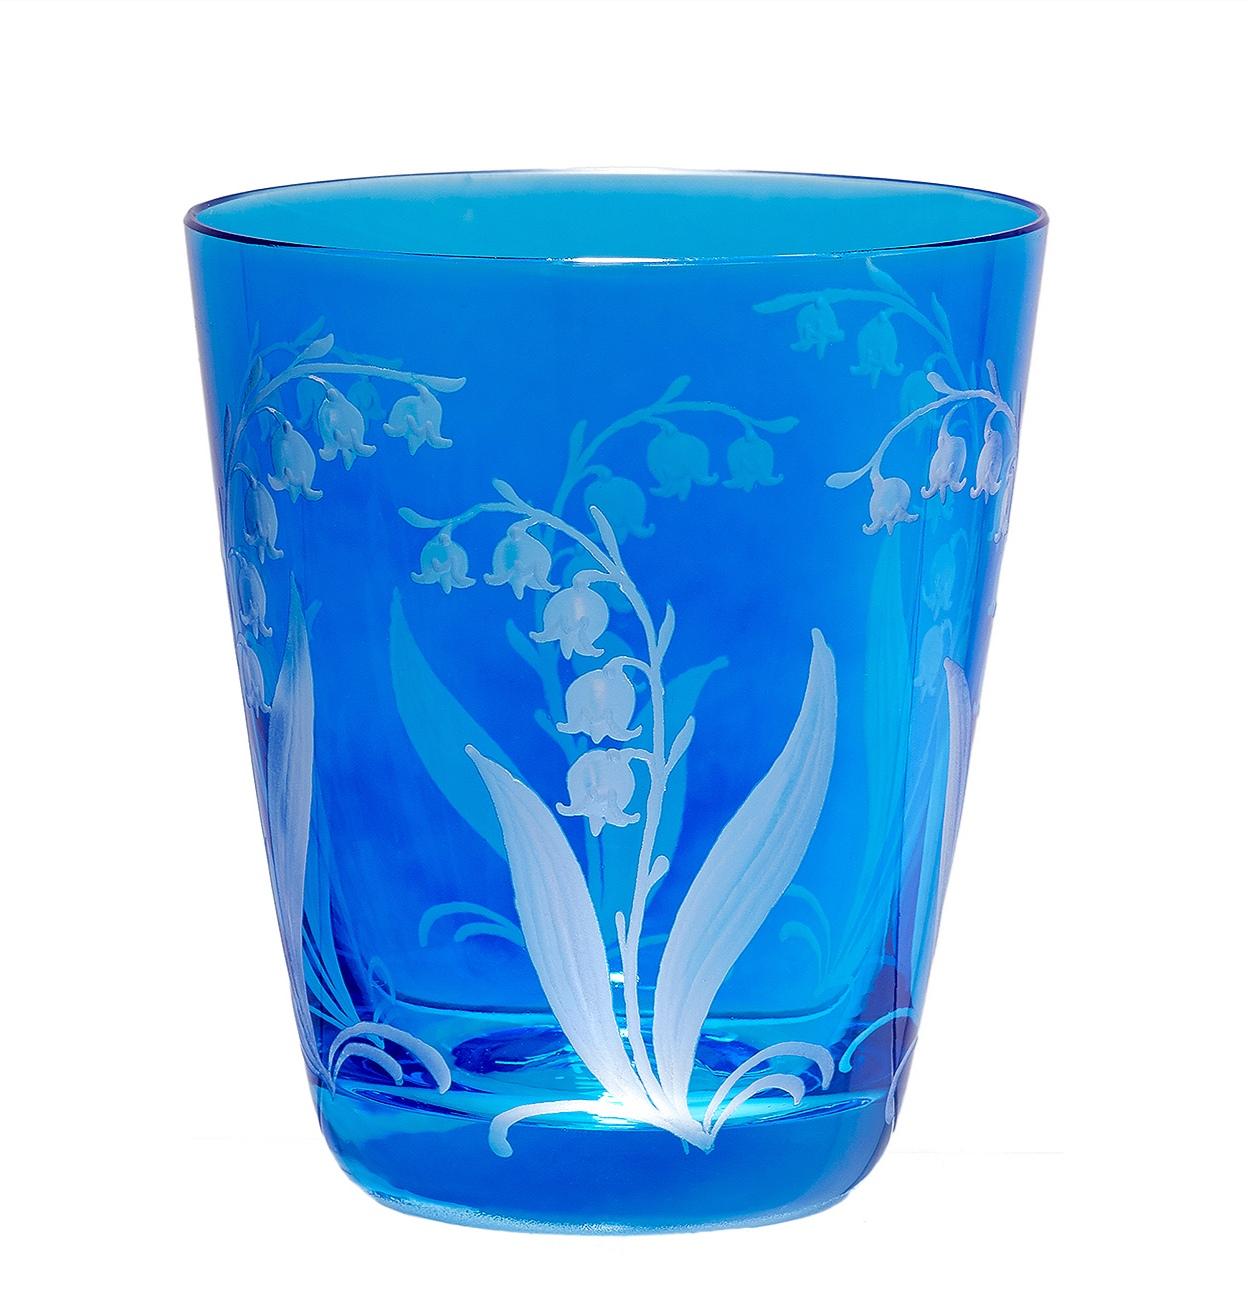 Set of 6 hand blown tumblers in blue crystal with a country style lily of the valley decor all around. A matching carafe can be ordered in addition. Can be ordered in different colors. Not recommend for dishwasher use
About Sofina crystal:
This hand